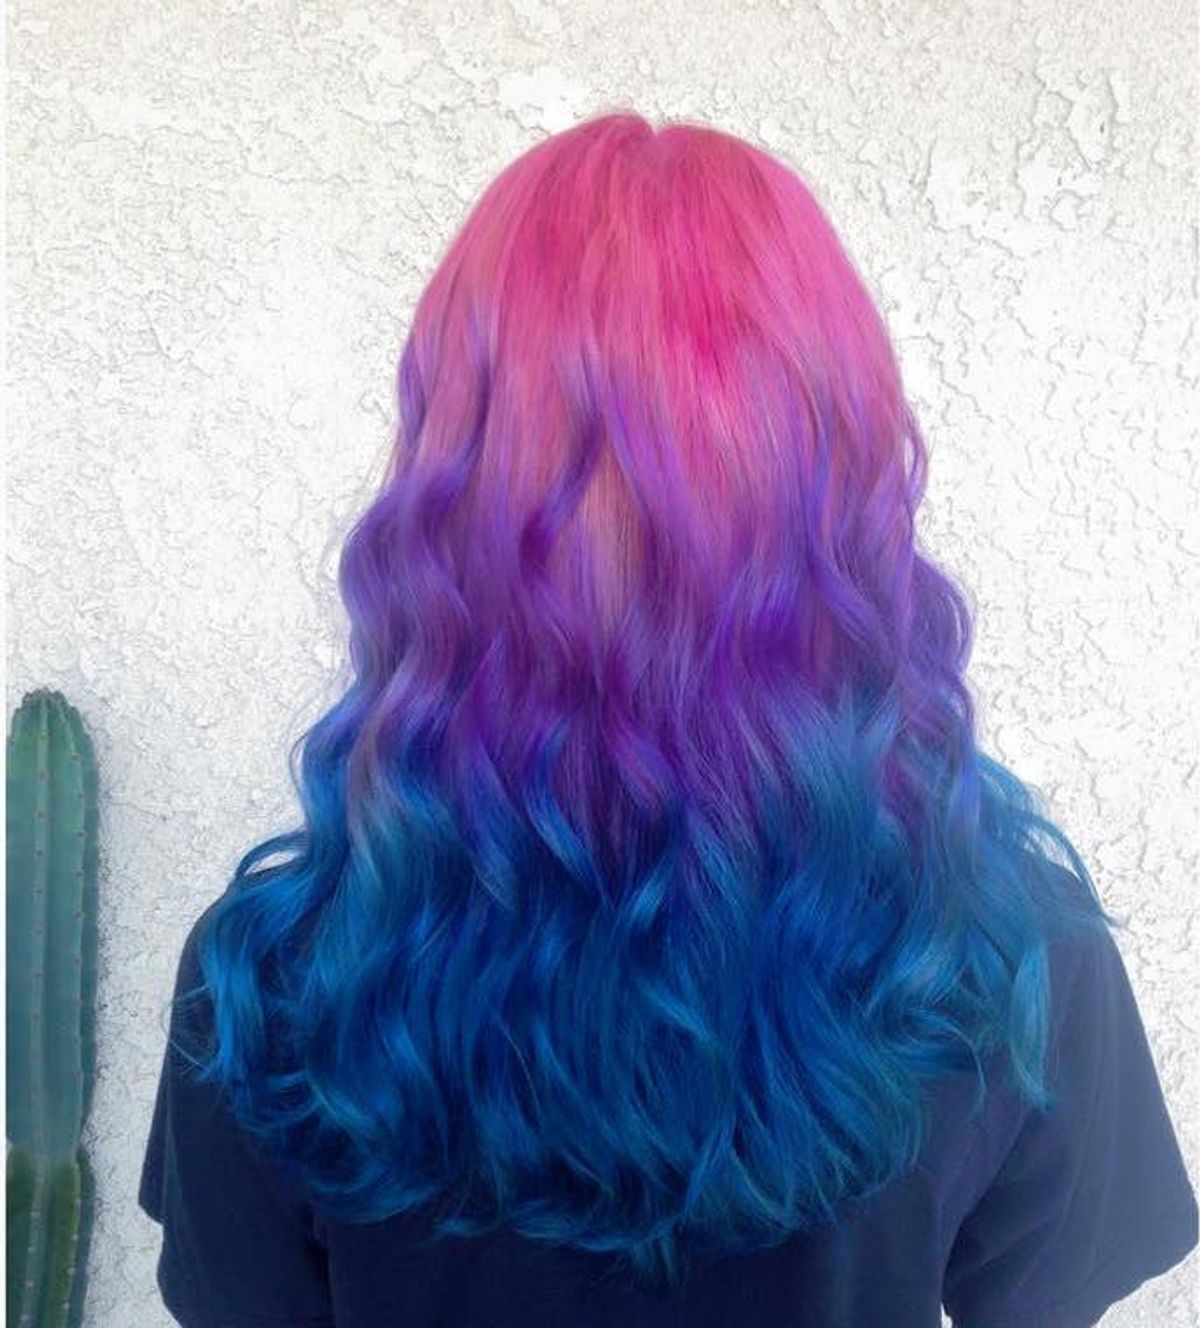 13 Things Nobody Tells You About Dying Your Hair